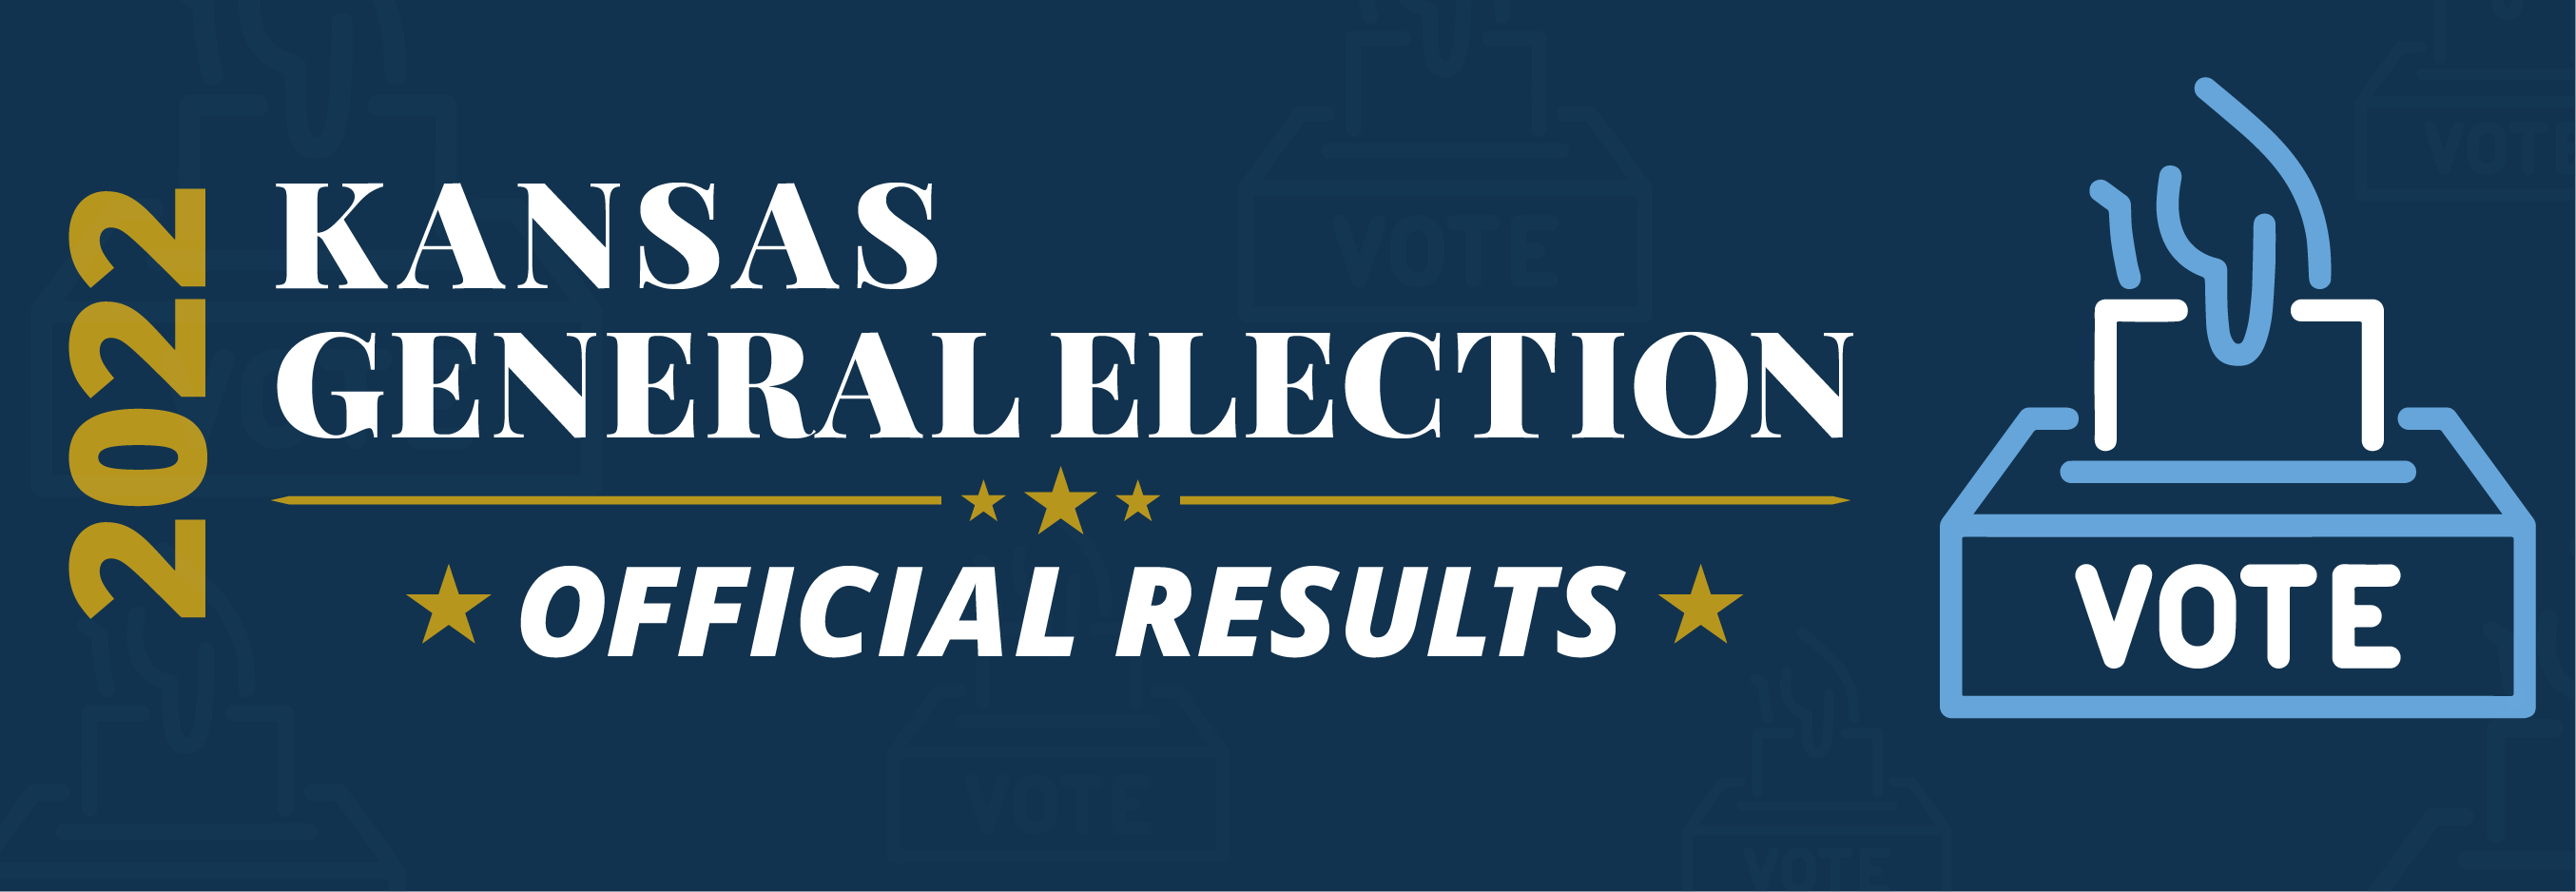 General Election Results image